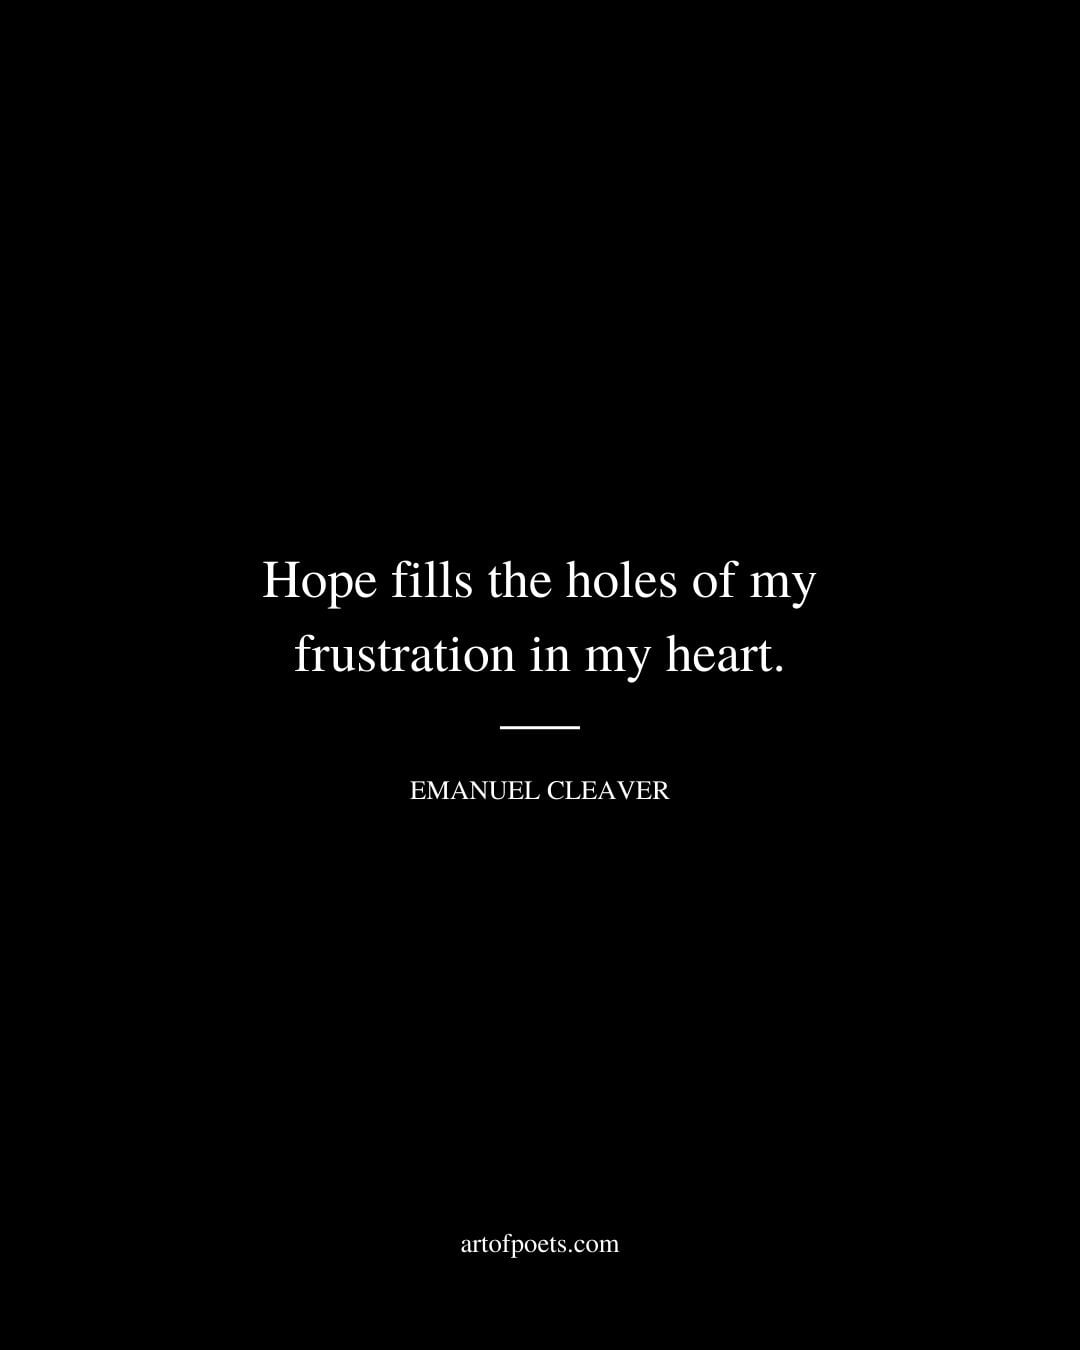 Hope fills the holes of my frustration in my heart. –Emanuel Cleaver